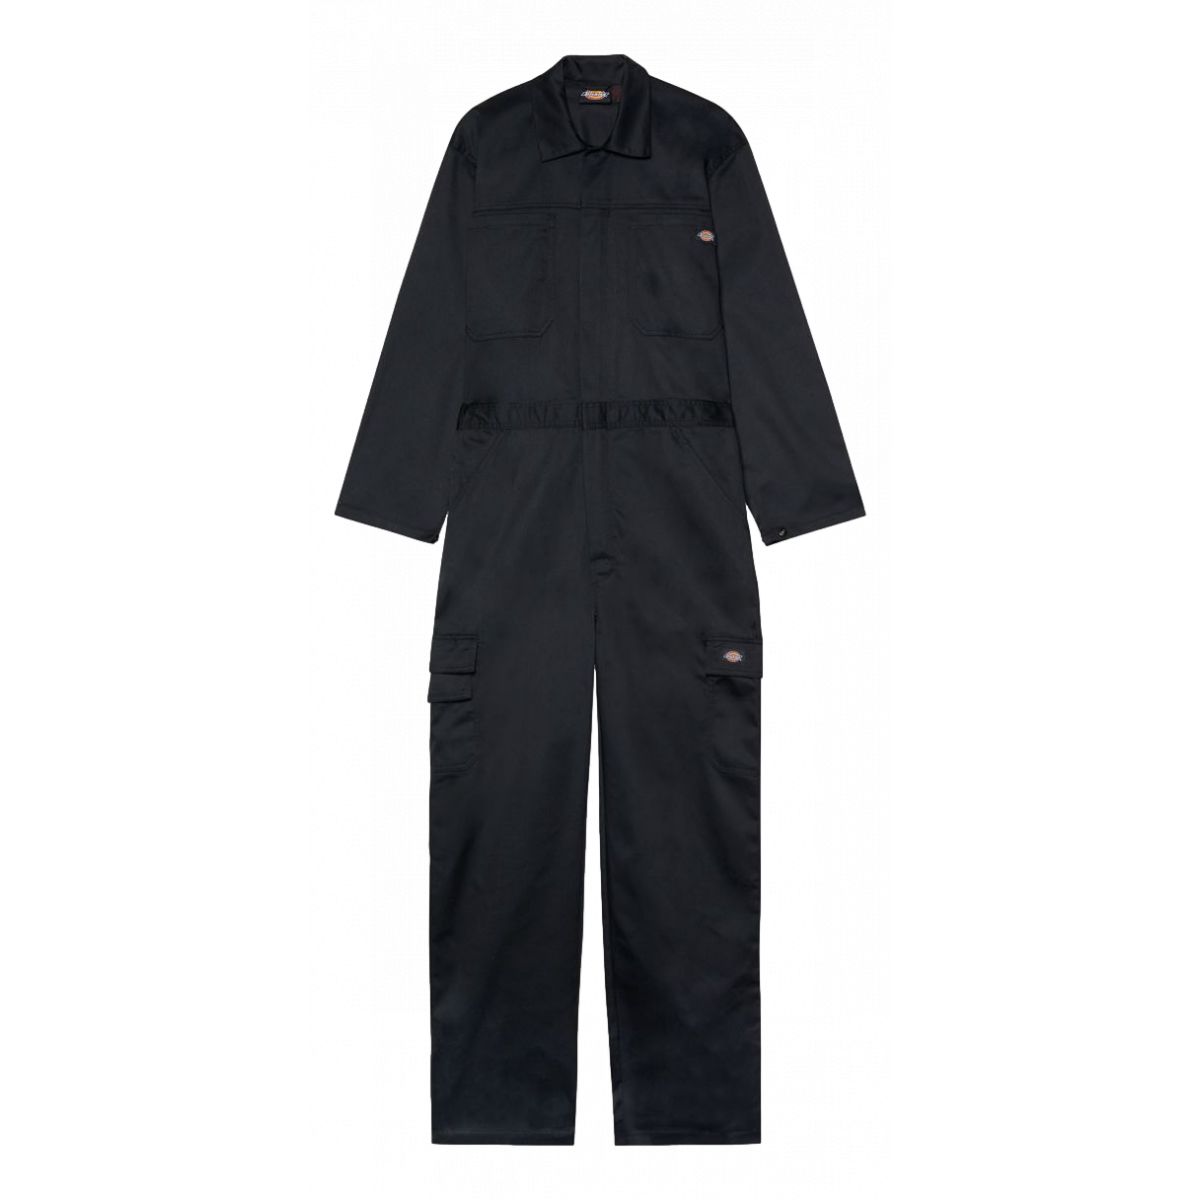 Combinaison Everyday Noir - Dickies - Taille S 0